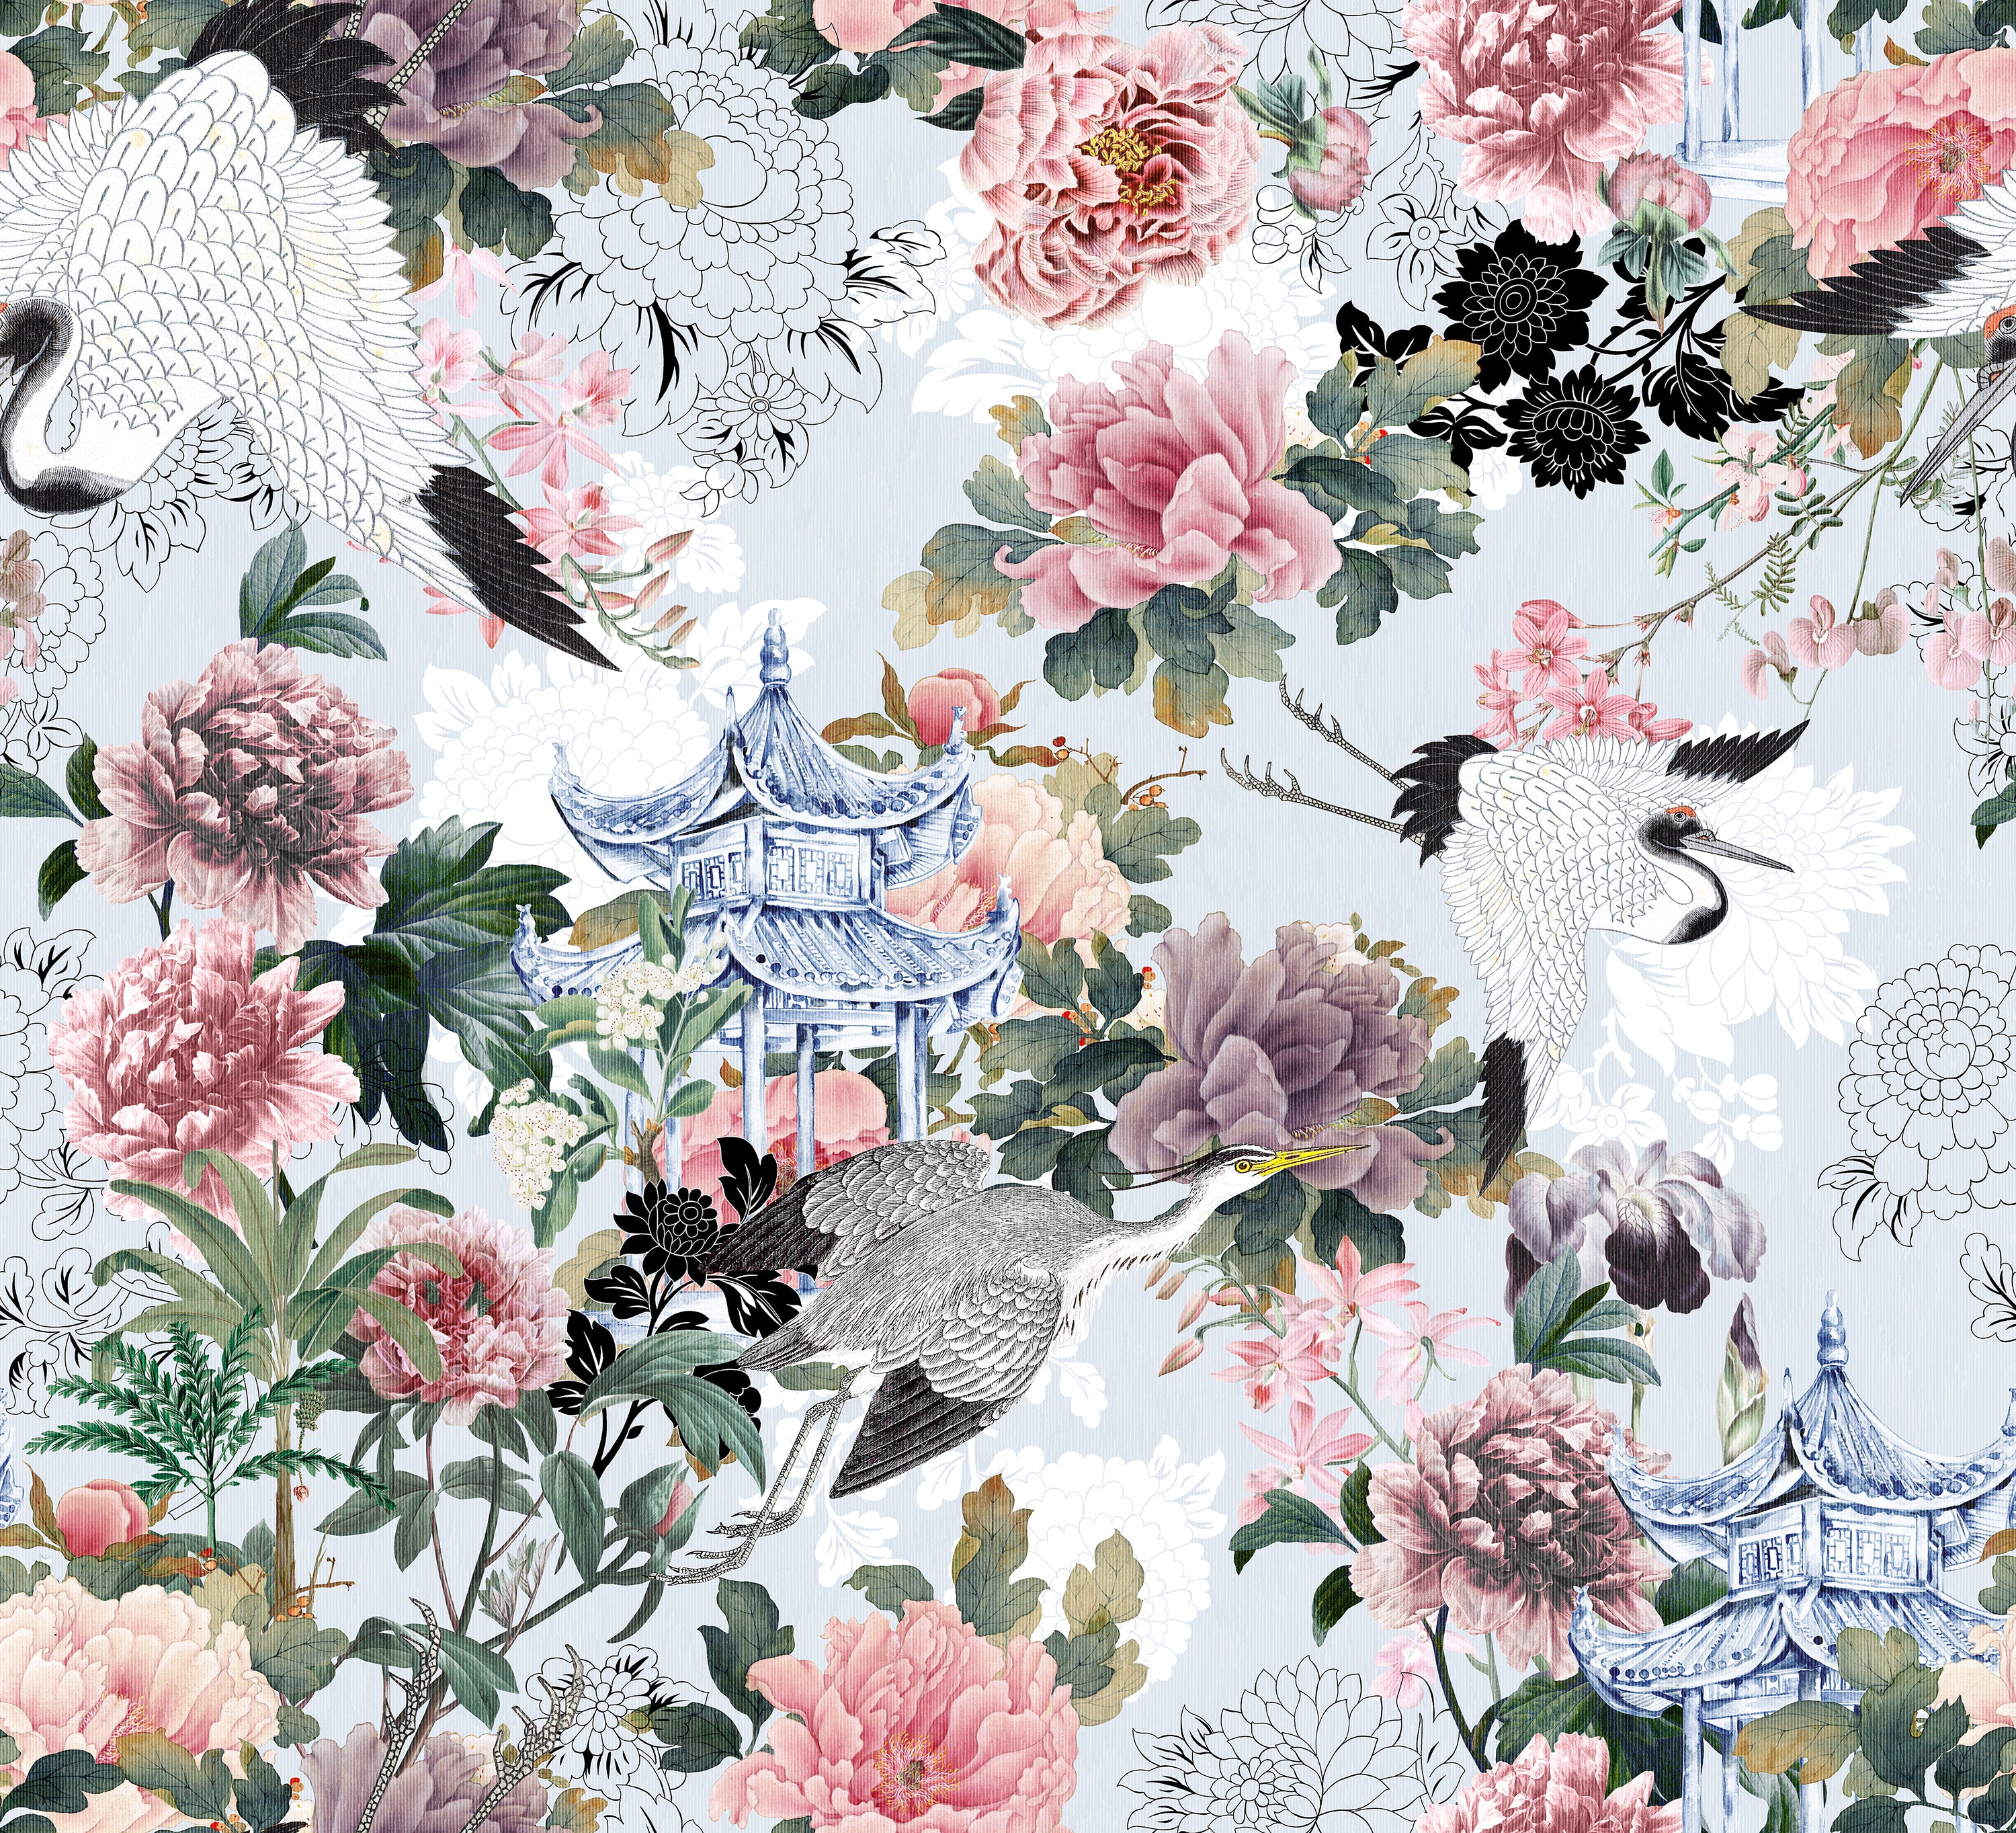 A detailed close-up of the Kyoto Dreams Wallpaper, featuring a sophisticated and intricate design of blooming peonies, traditional pagodas, and graceful cranes in a tranquil garden setting. The artwork blends soft pinks and whites with bold blacks, creating a stunning visual contrast against a light grey backdrop.